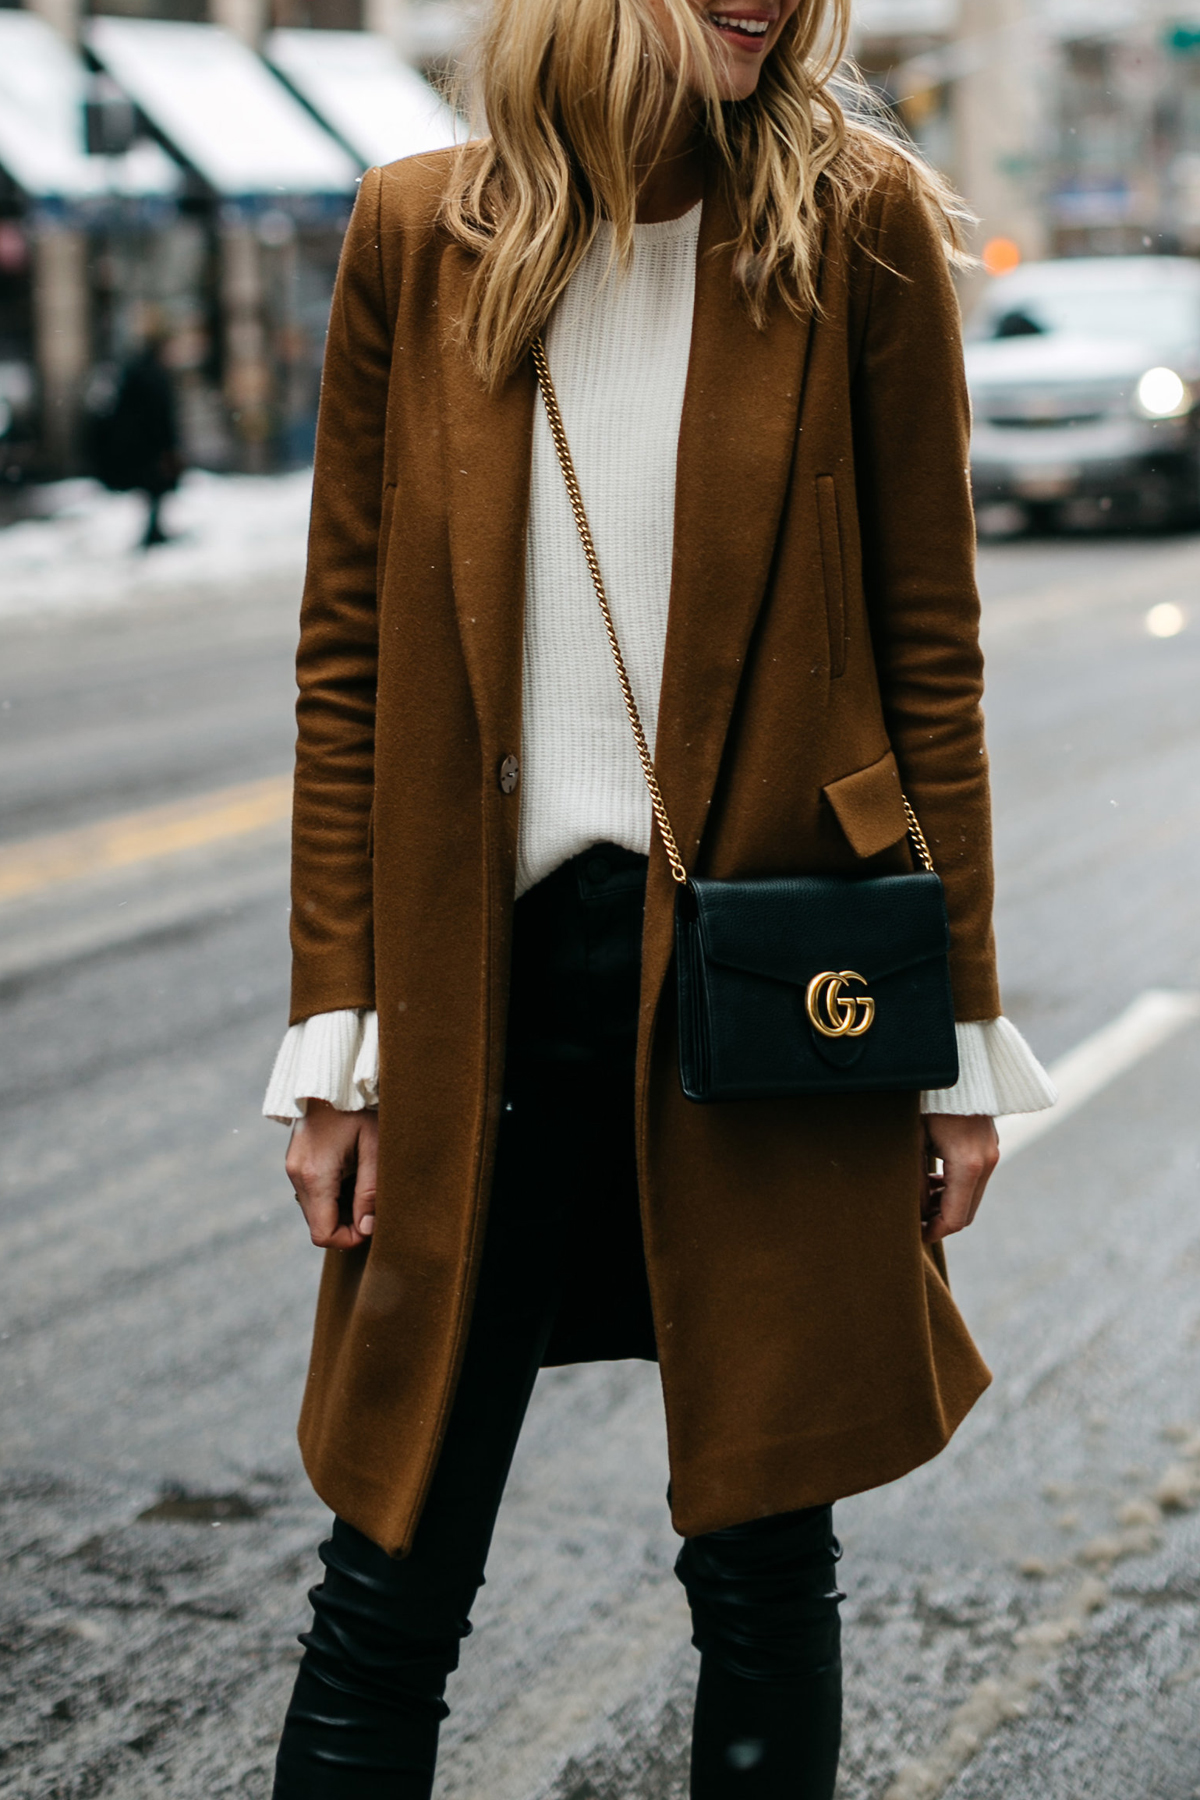 NYFW, Winter Outfit, Camel Wool Coat, White Ruffle Sleeve Sweater, Black Faux Leather Pants, Gucci Marmont Handbag, Street Style